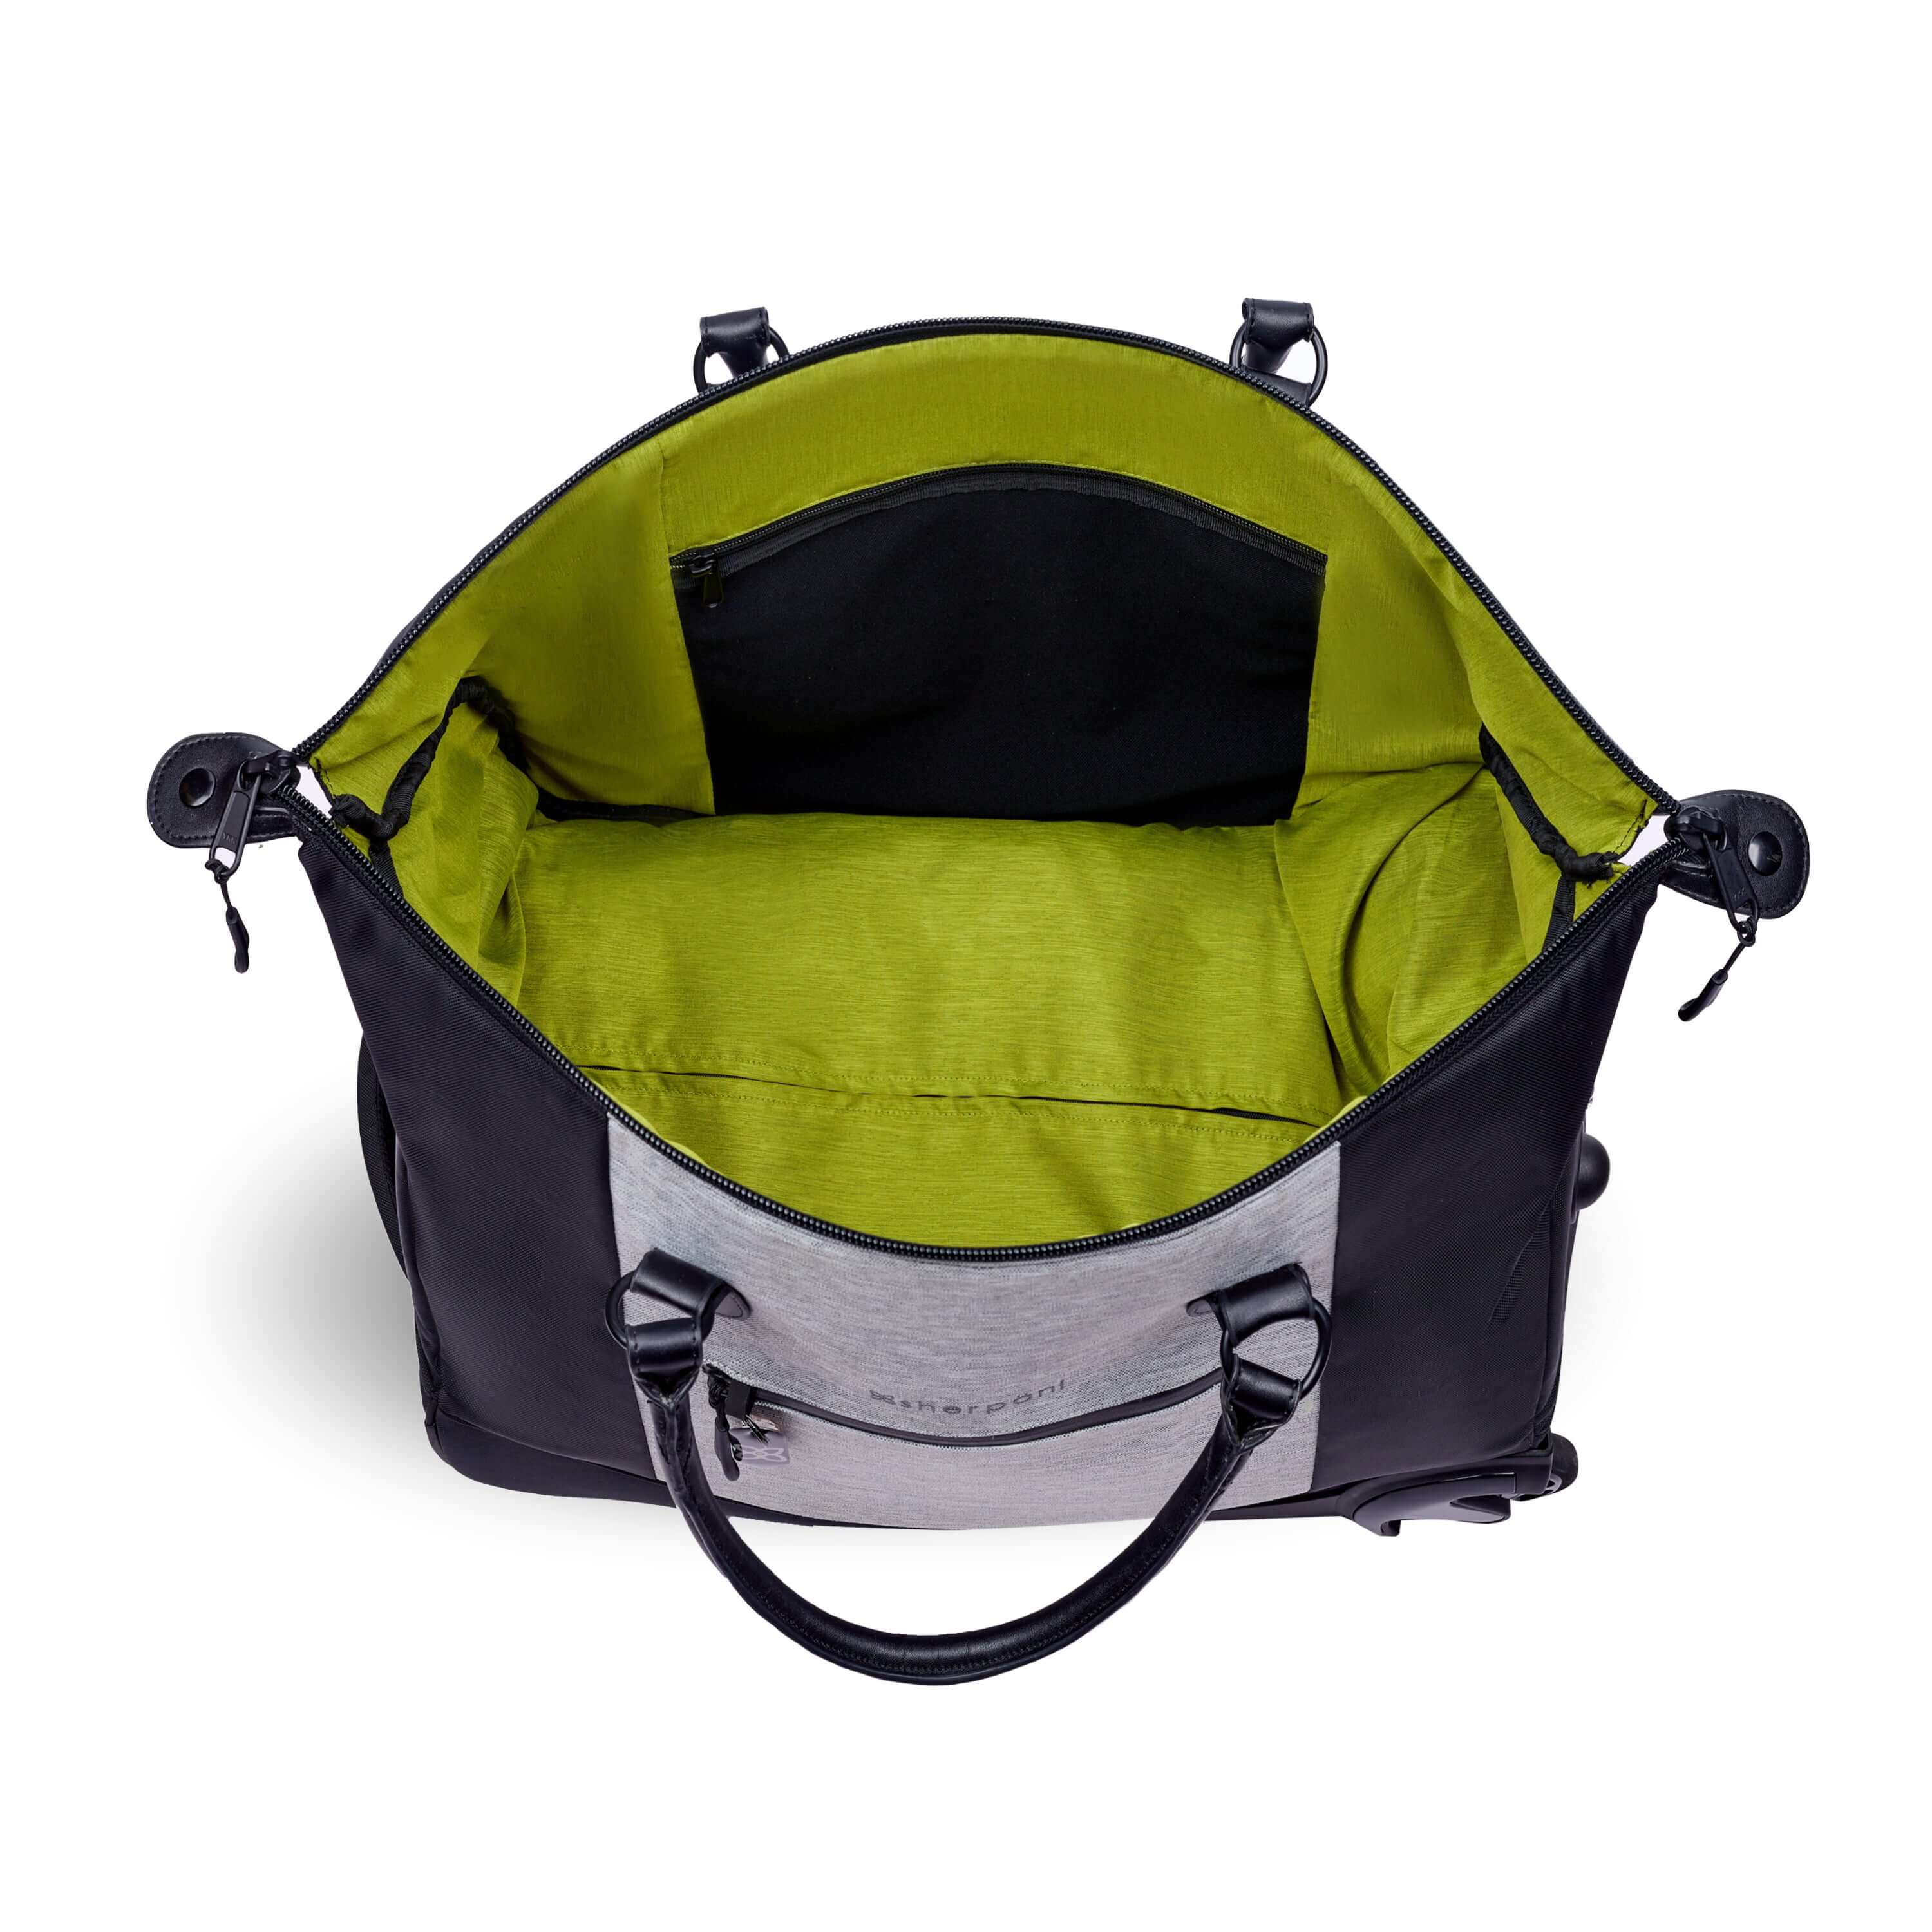 Top view of Sherpani’s Anti-Theft rolling duffle the Trip in Sterling. The main zipper compartment is open showcasing a wide mouth and revealing a lime green interior with an internal zipper pocket. 